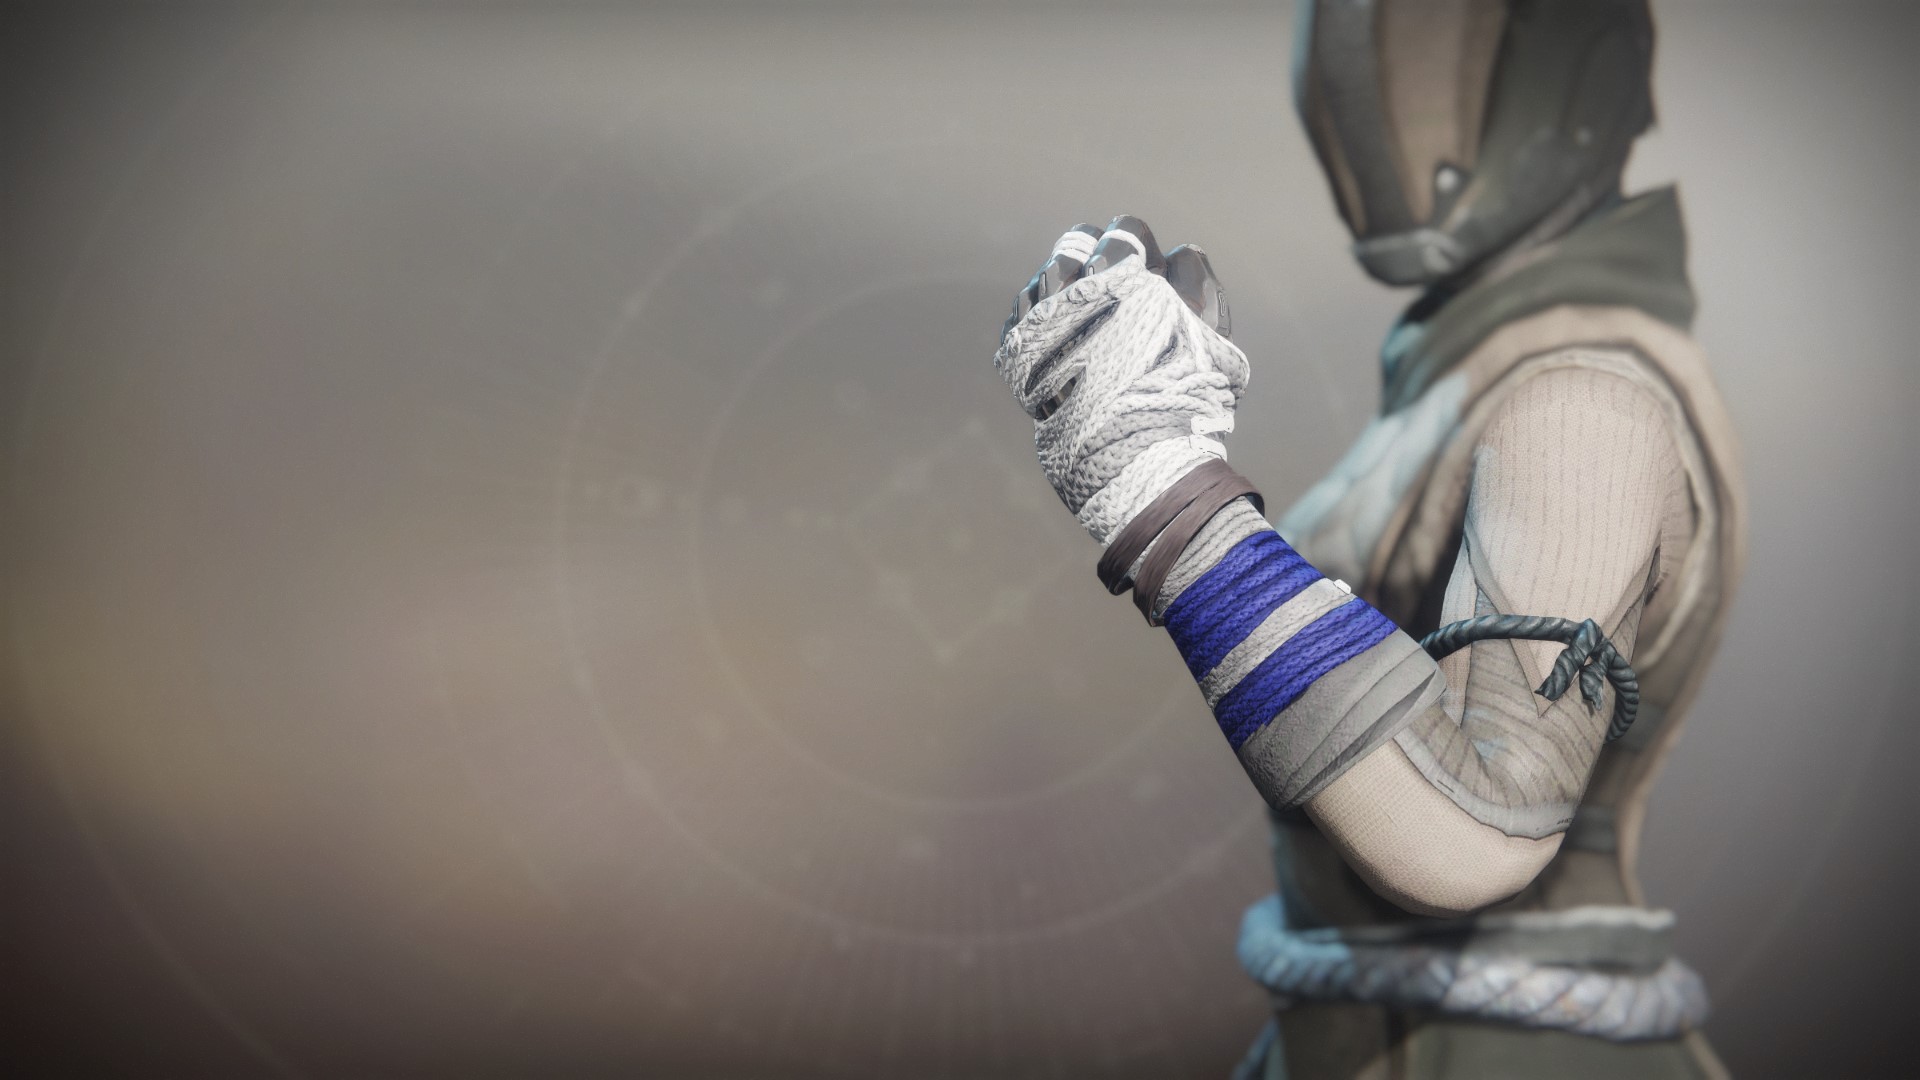 An in-game render of the Fire-Forged Warlock Arm Ornament.